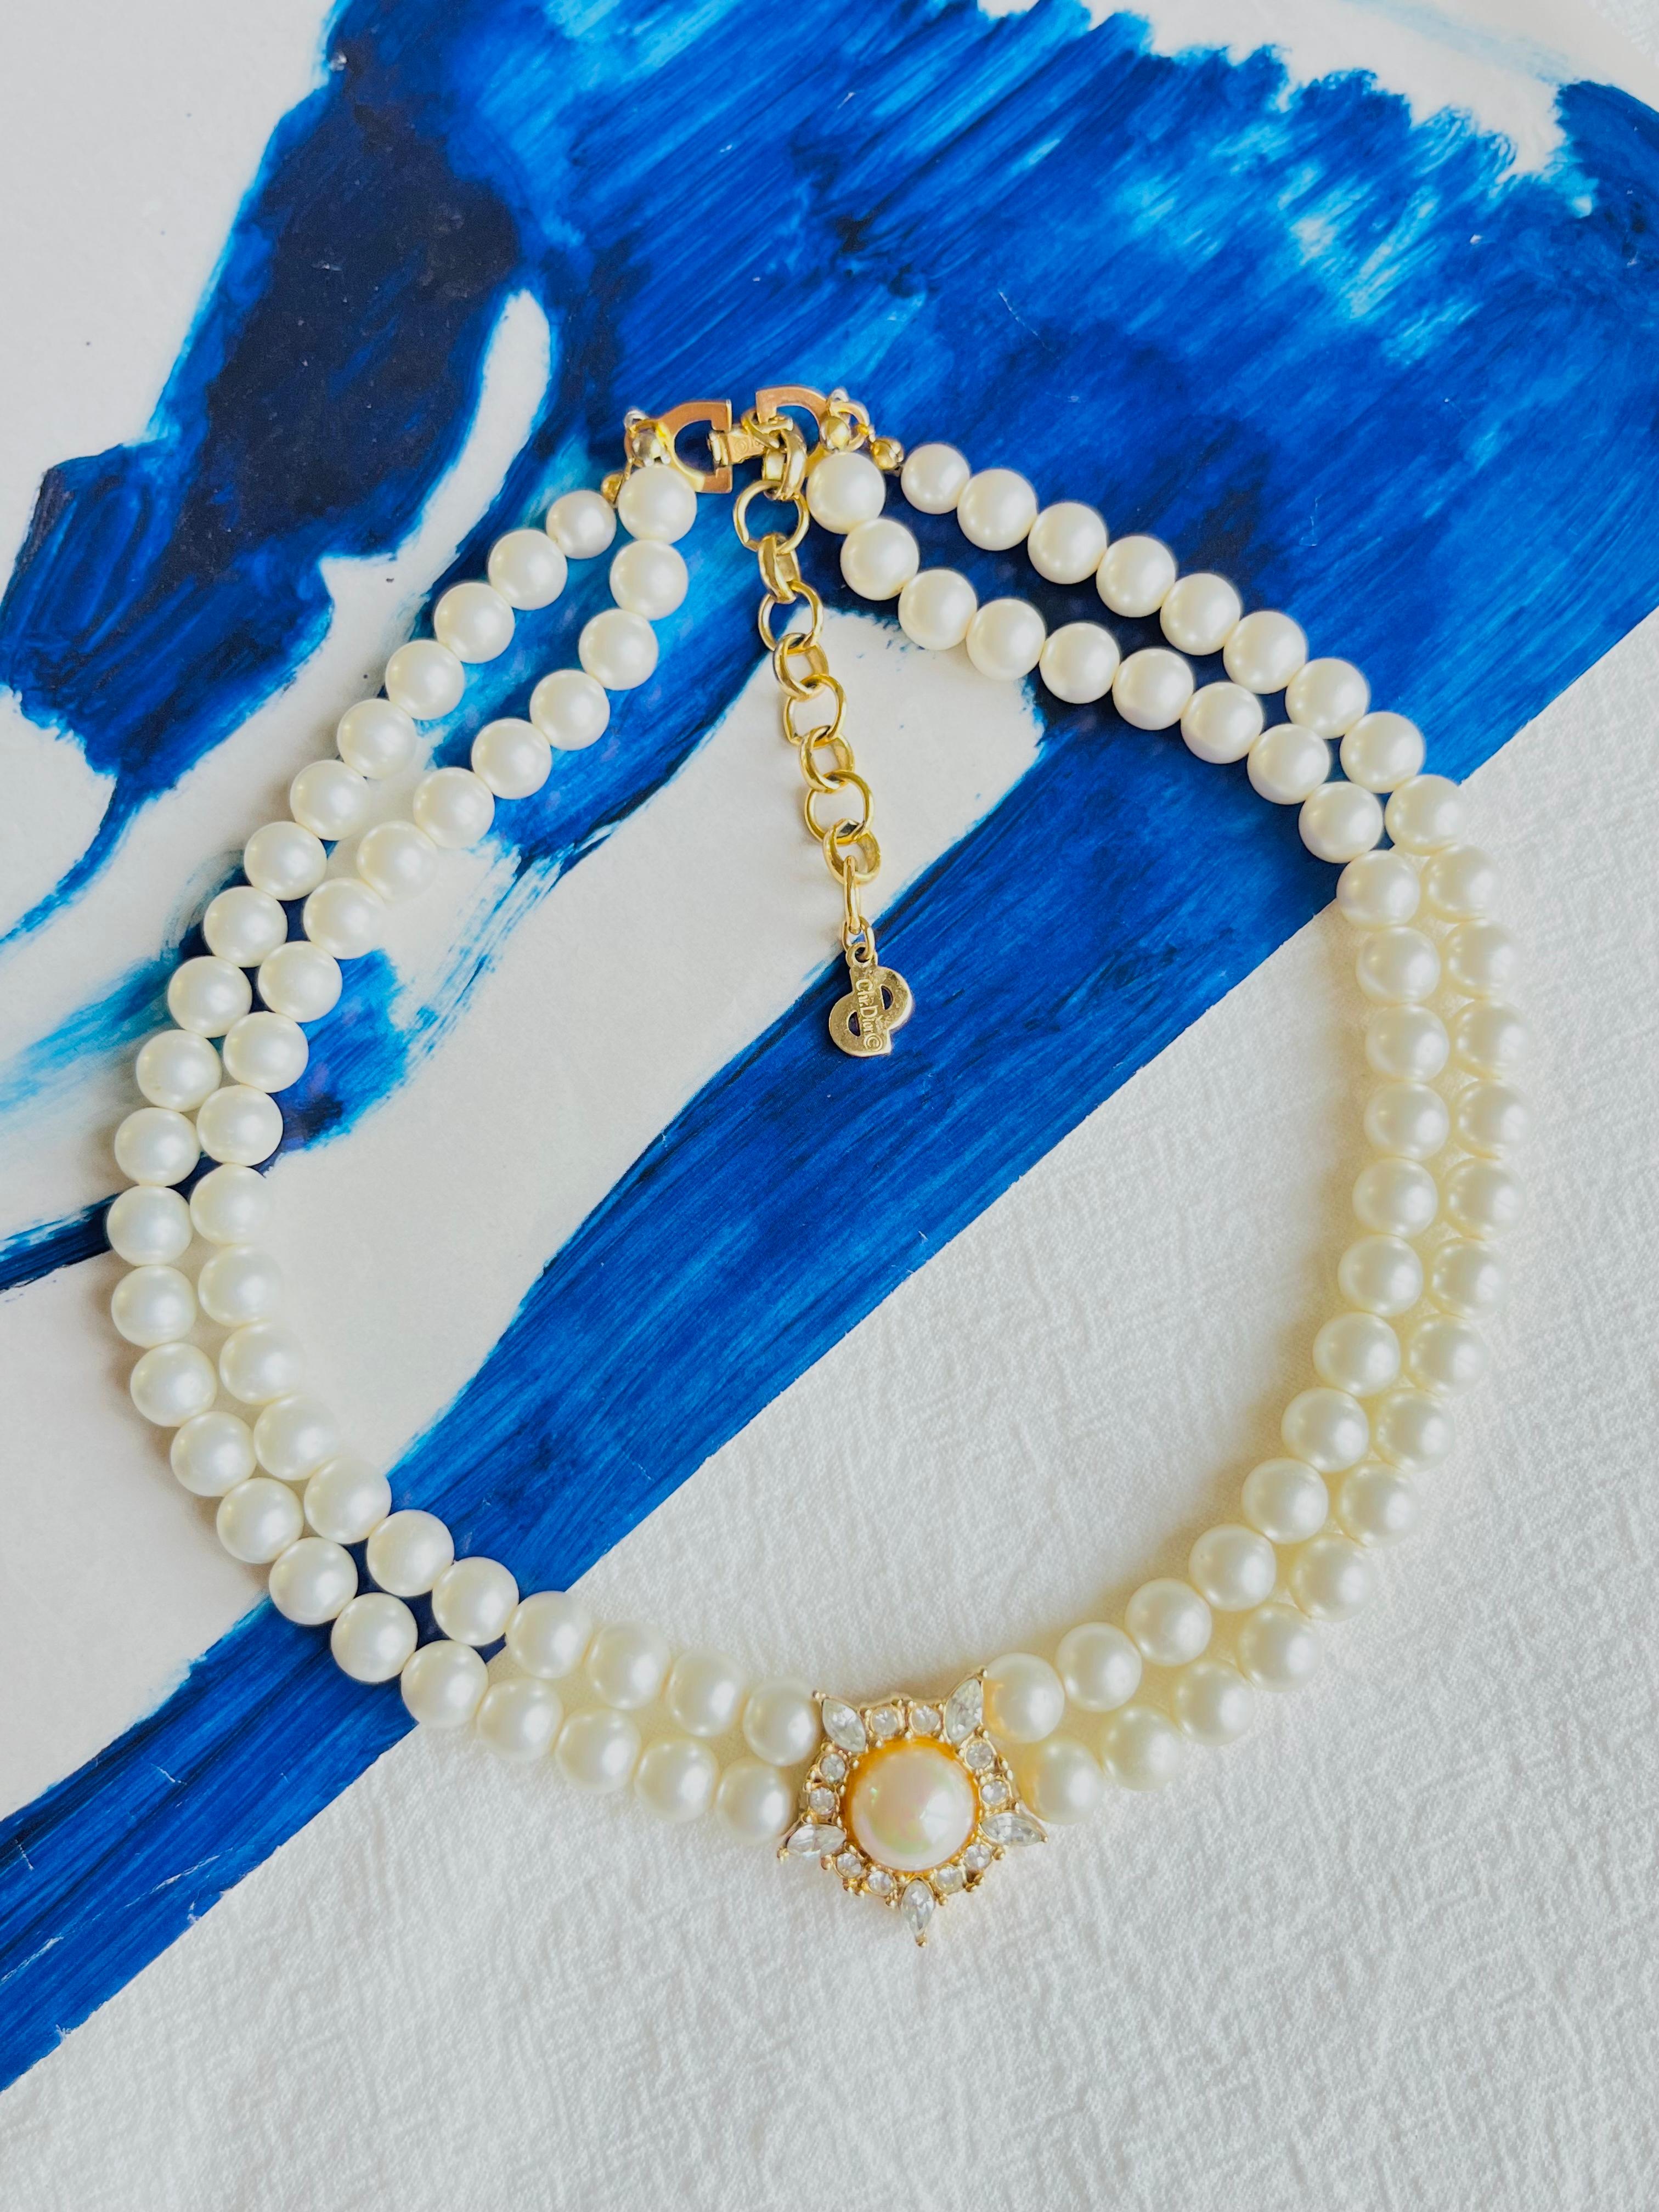 Christian Dior Vintage 1970s Double Strands Faux White Round Pearls Pentagon Crystals Pendant Choker Necklace, Gold Plated

Very good condition. 100% Genuine.

Marked 'Chr.Dior (C) '. Rare to find.

Materials: Gold Plated metal, rhinestones, Faux